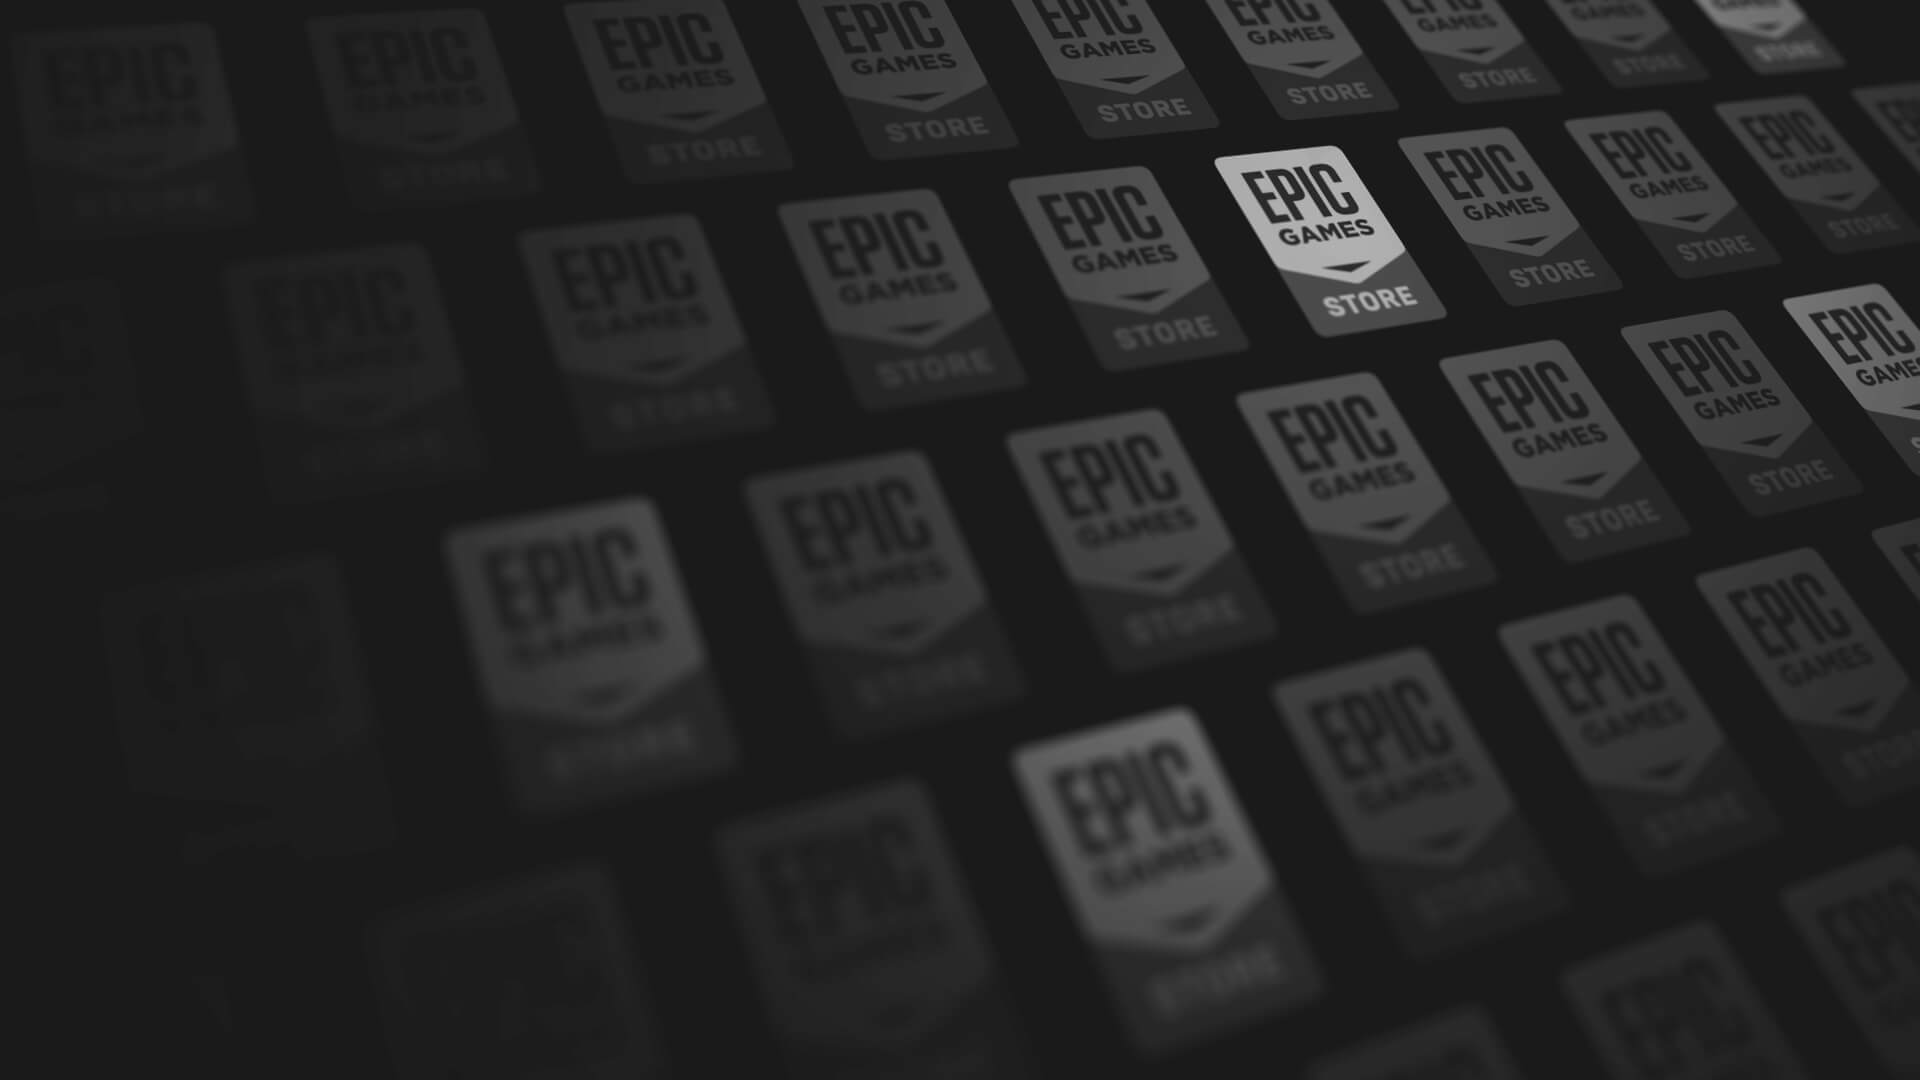 epic games store logo  Image of epic games store logo